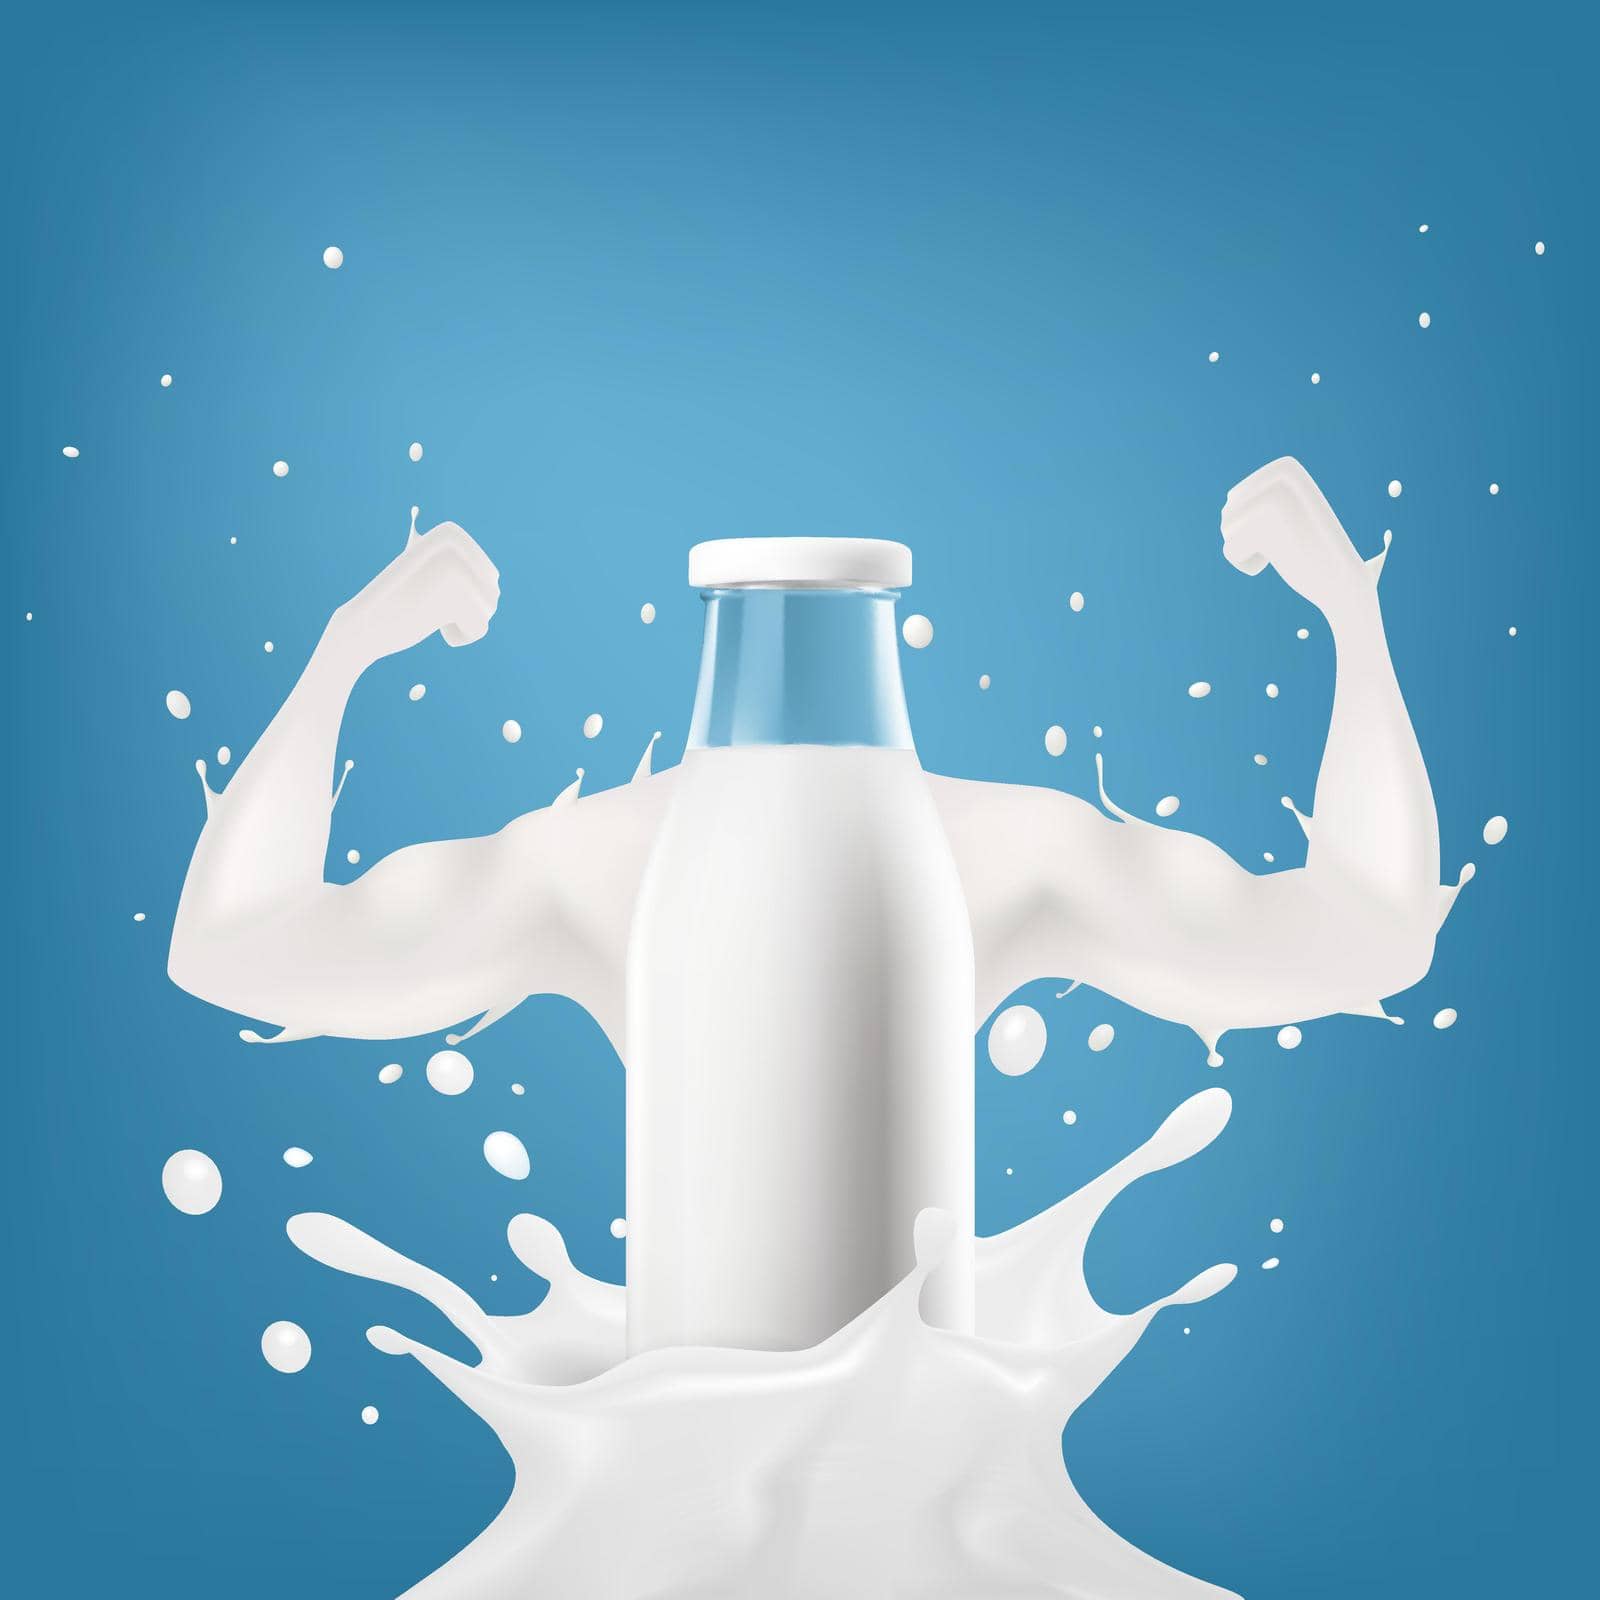 Realistic Transparent Clear Milk Bottle Advertising Template by VectorThings